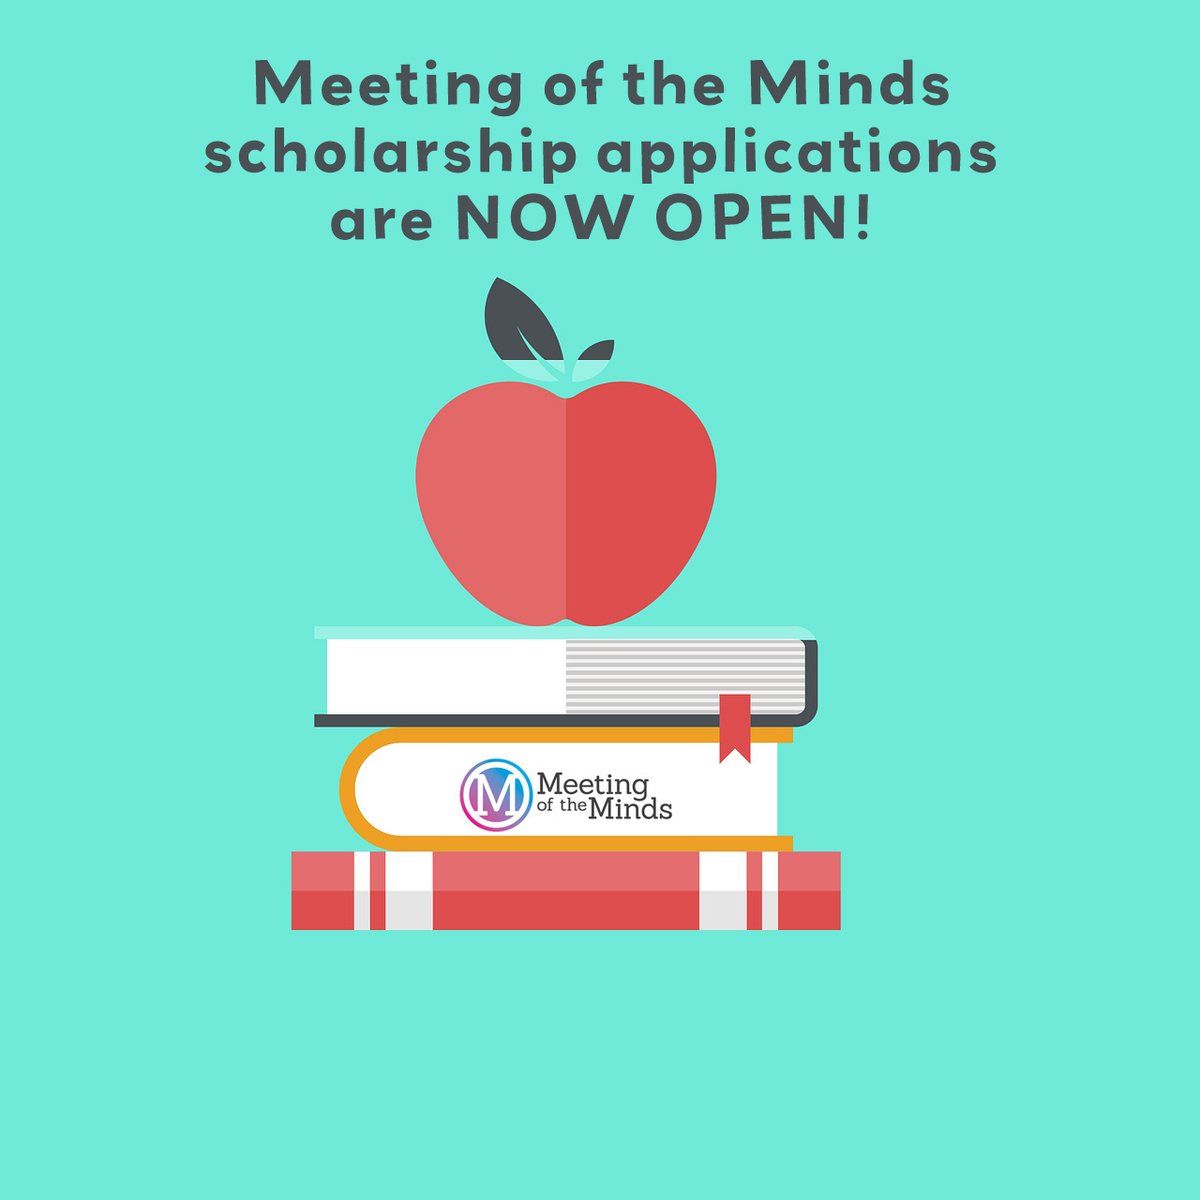 Scholarship applications for Meeting of the Minds are NOW OPEN!
Find out more at mopiptraining.org/mom/scholarshi… 

#MoMinds24 #Prevention #PreventionWorks #AODPrevention #MentalHealth #HigherEd #CollegeHealth #PublicHealth #PreventionConference #MissouriHealth